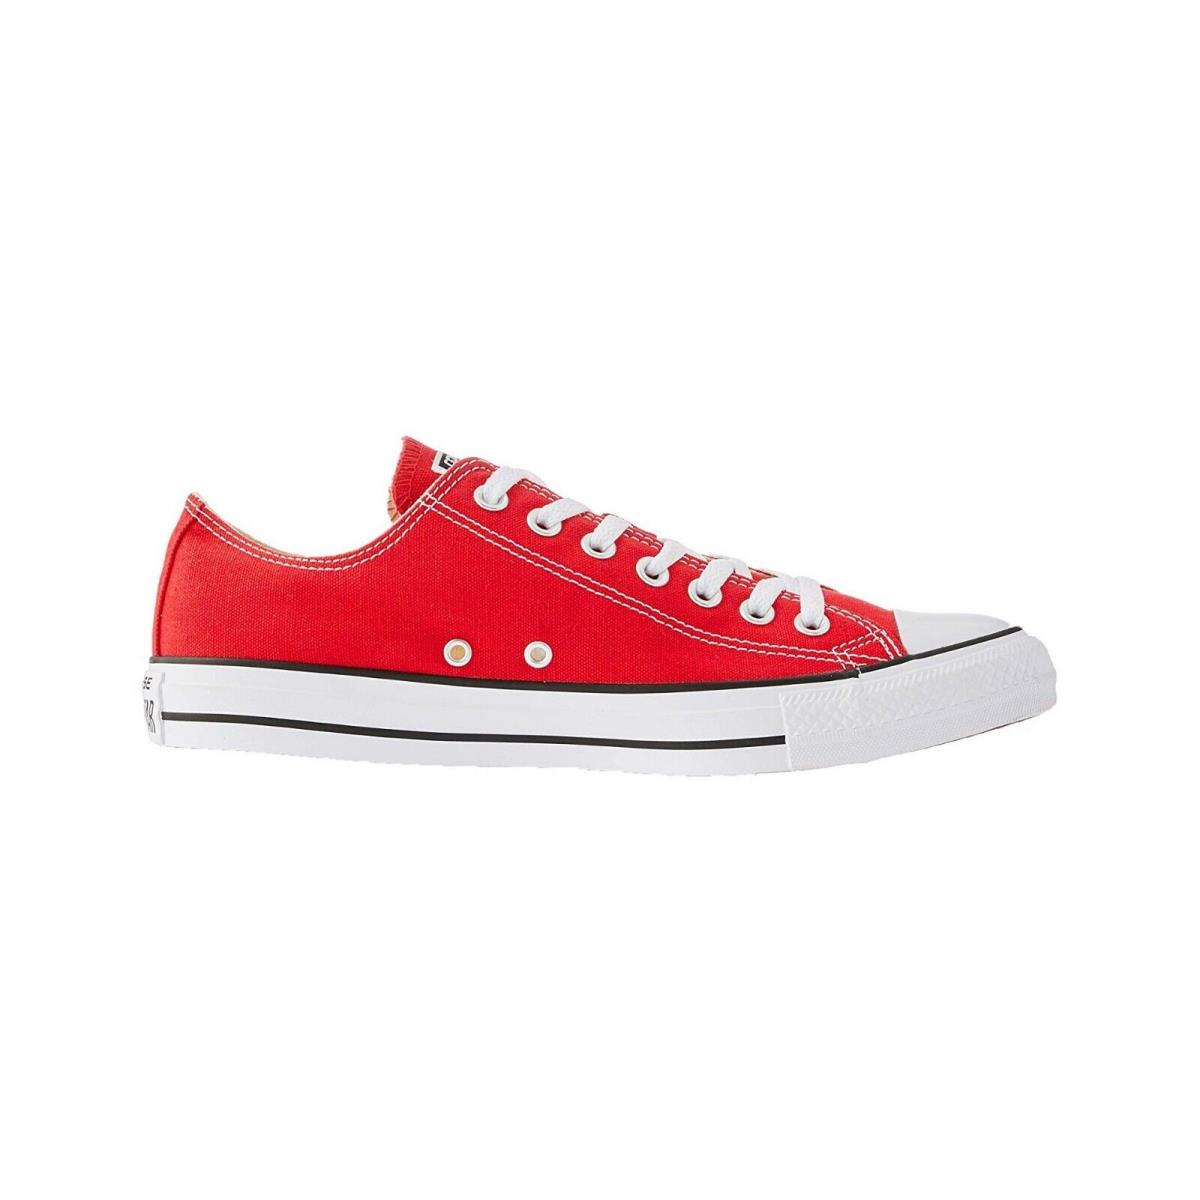 Converse Chuck Taylor All Star Low Top Shoes Sneakers M9696 - Red/white